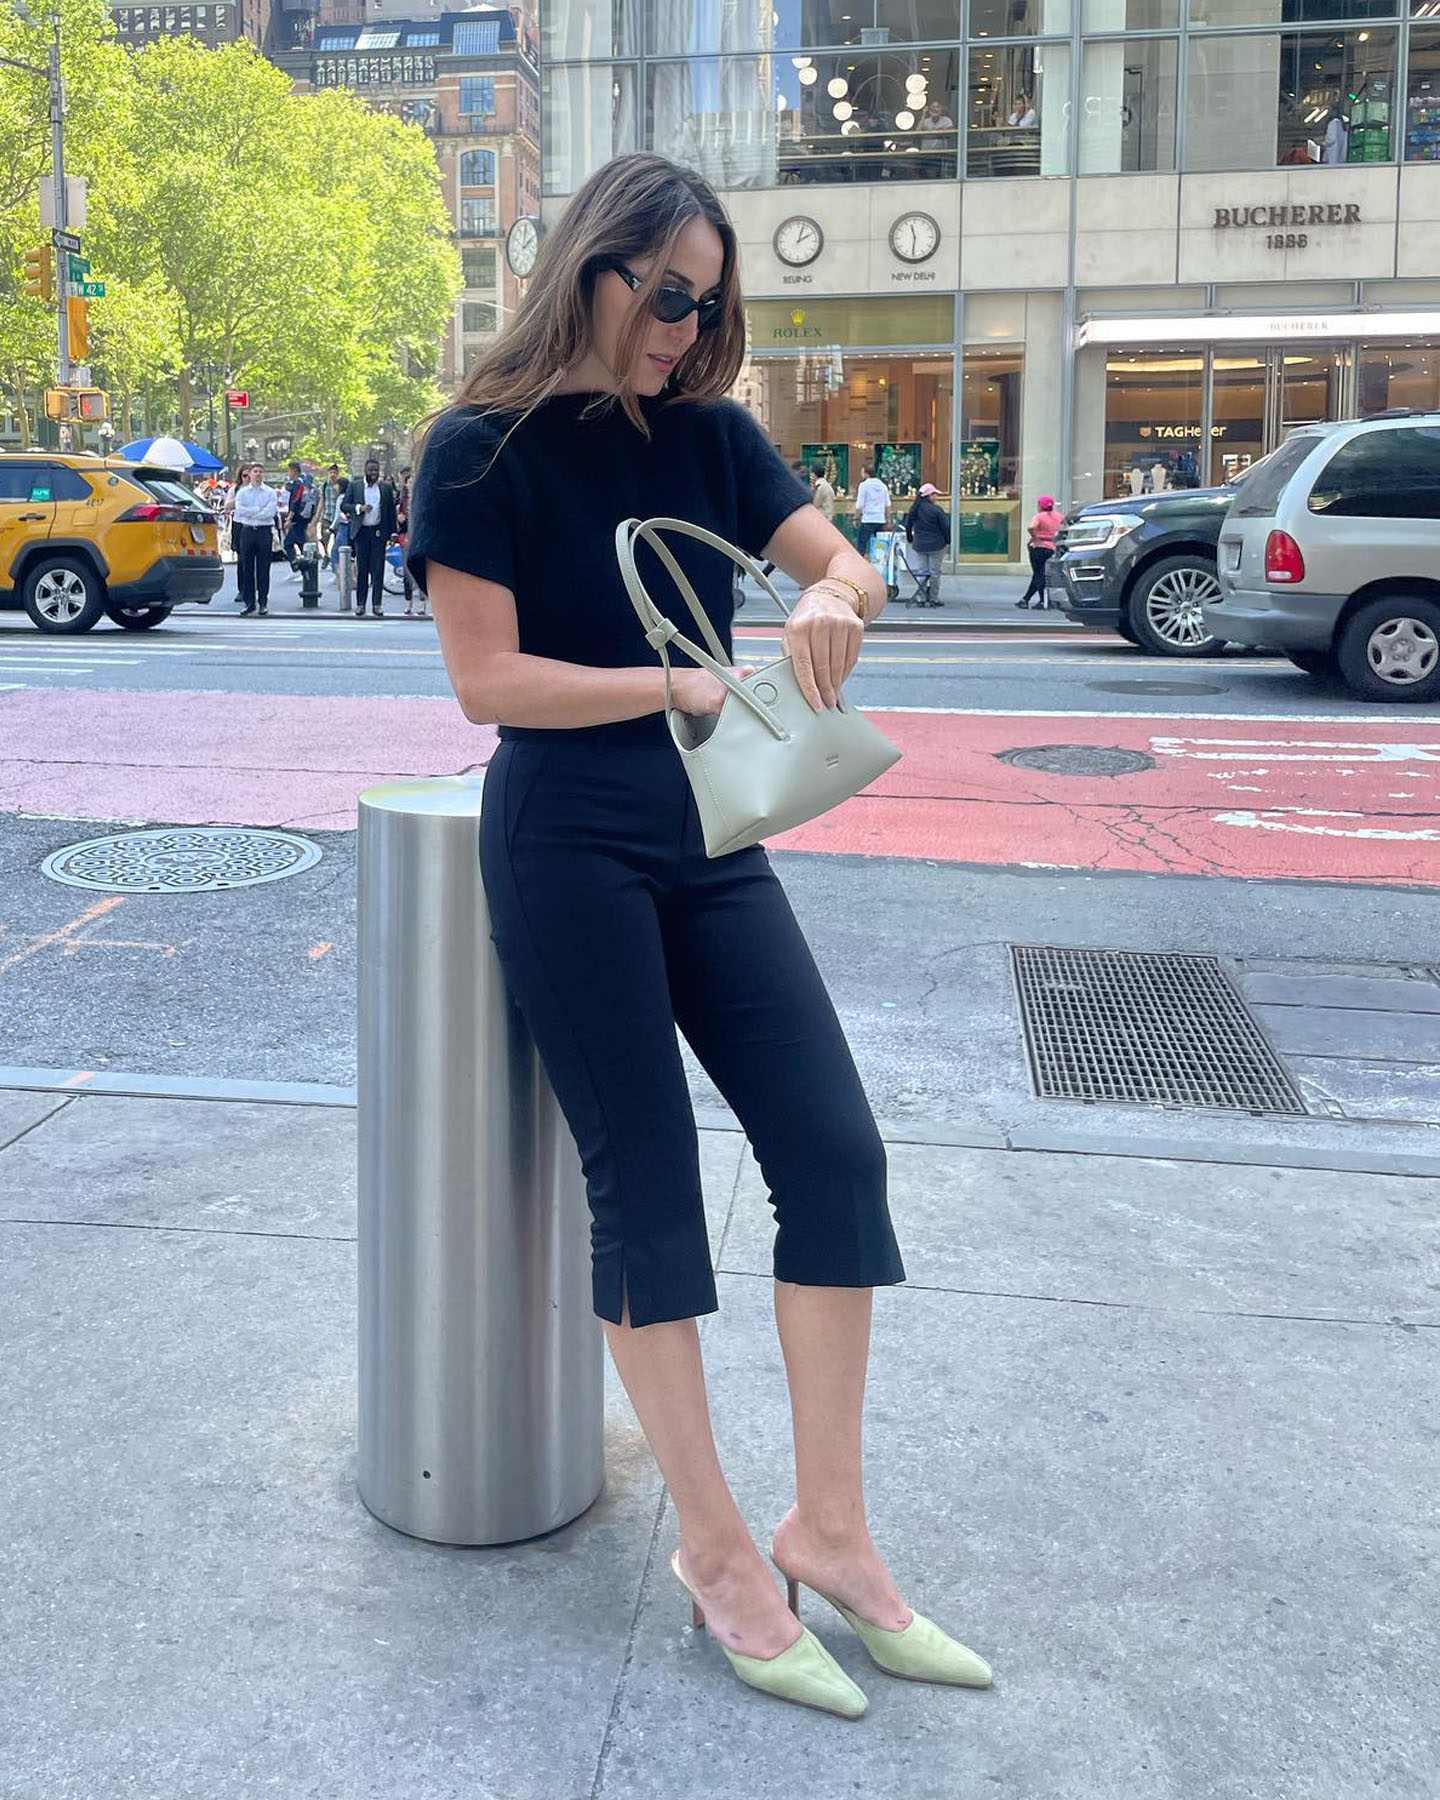 fashion editor Anna LaPlaca poses on the sidewalk in NYC wearing a short-sleeve black top, vented capri pants, a neutral shoulder bag, and light-green mule pumps